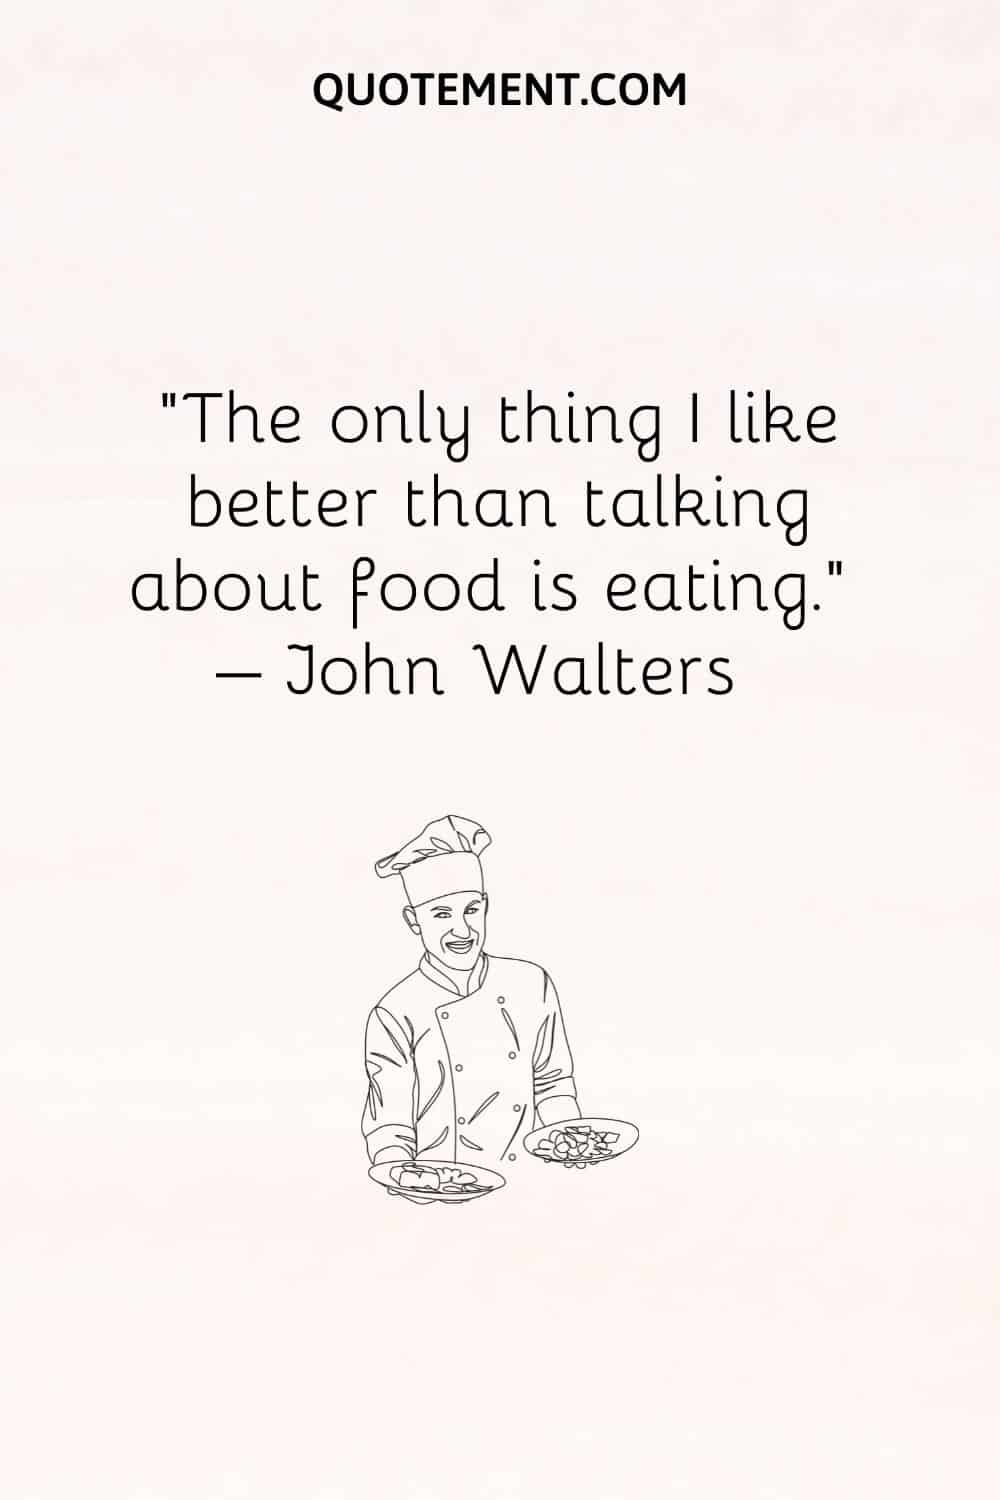 The only thing I like better than talking about food is eating.